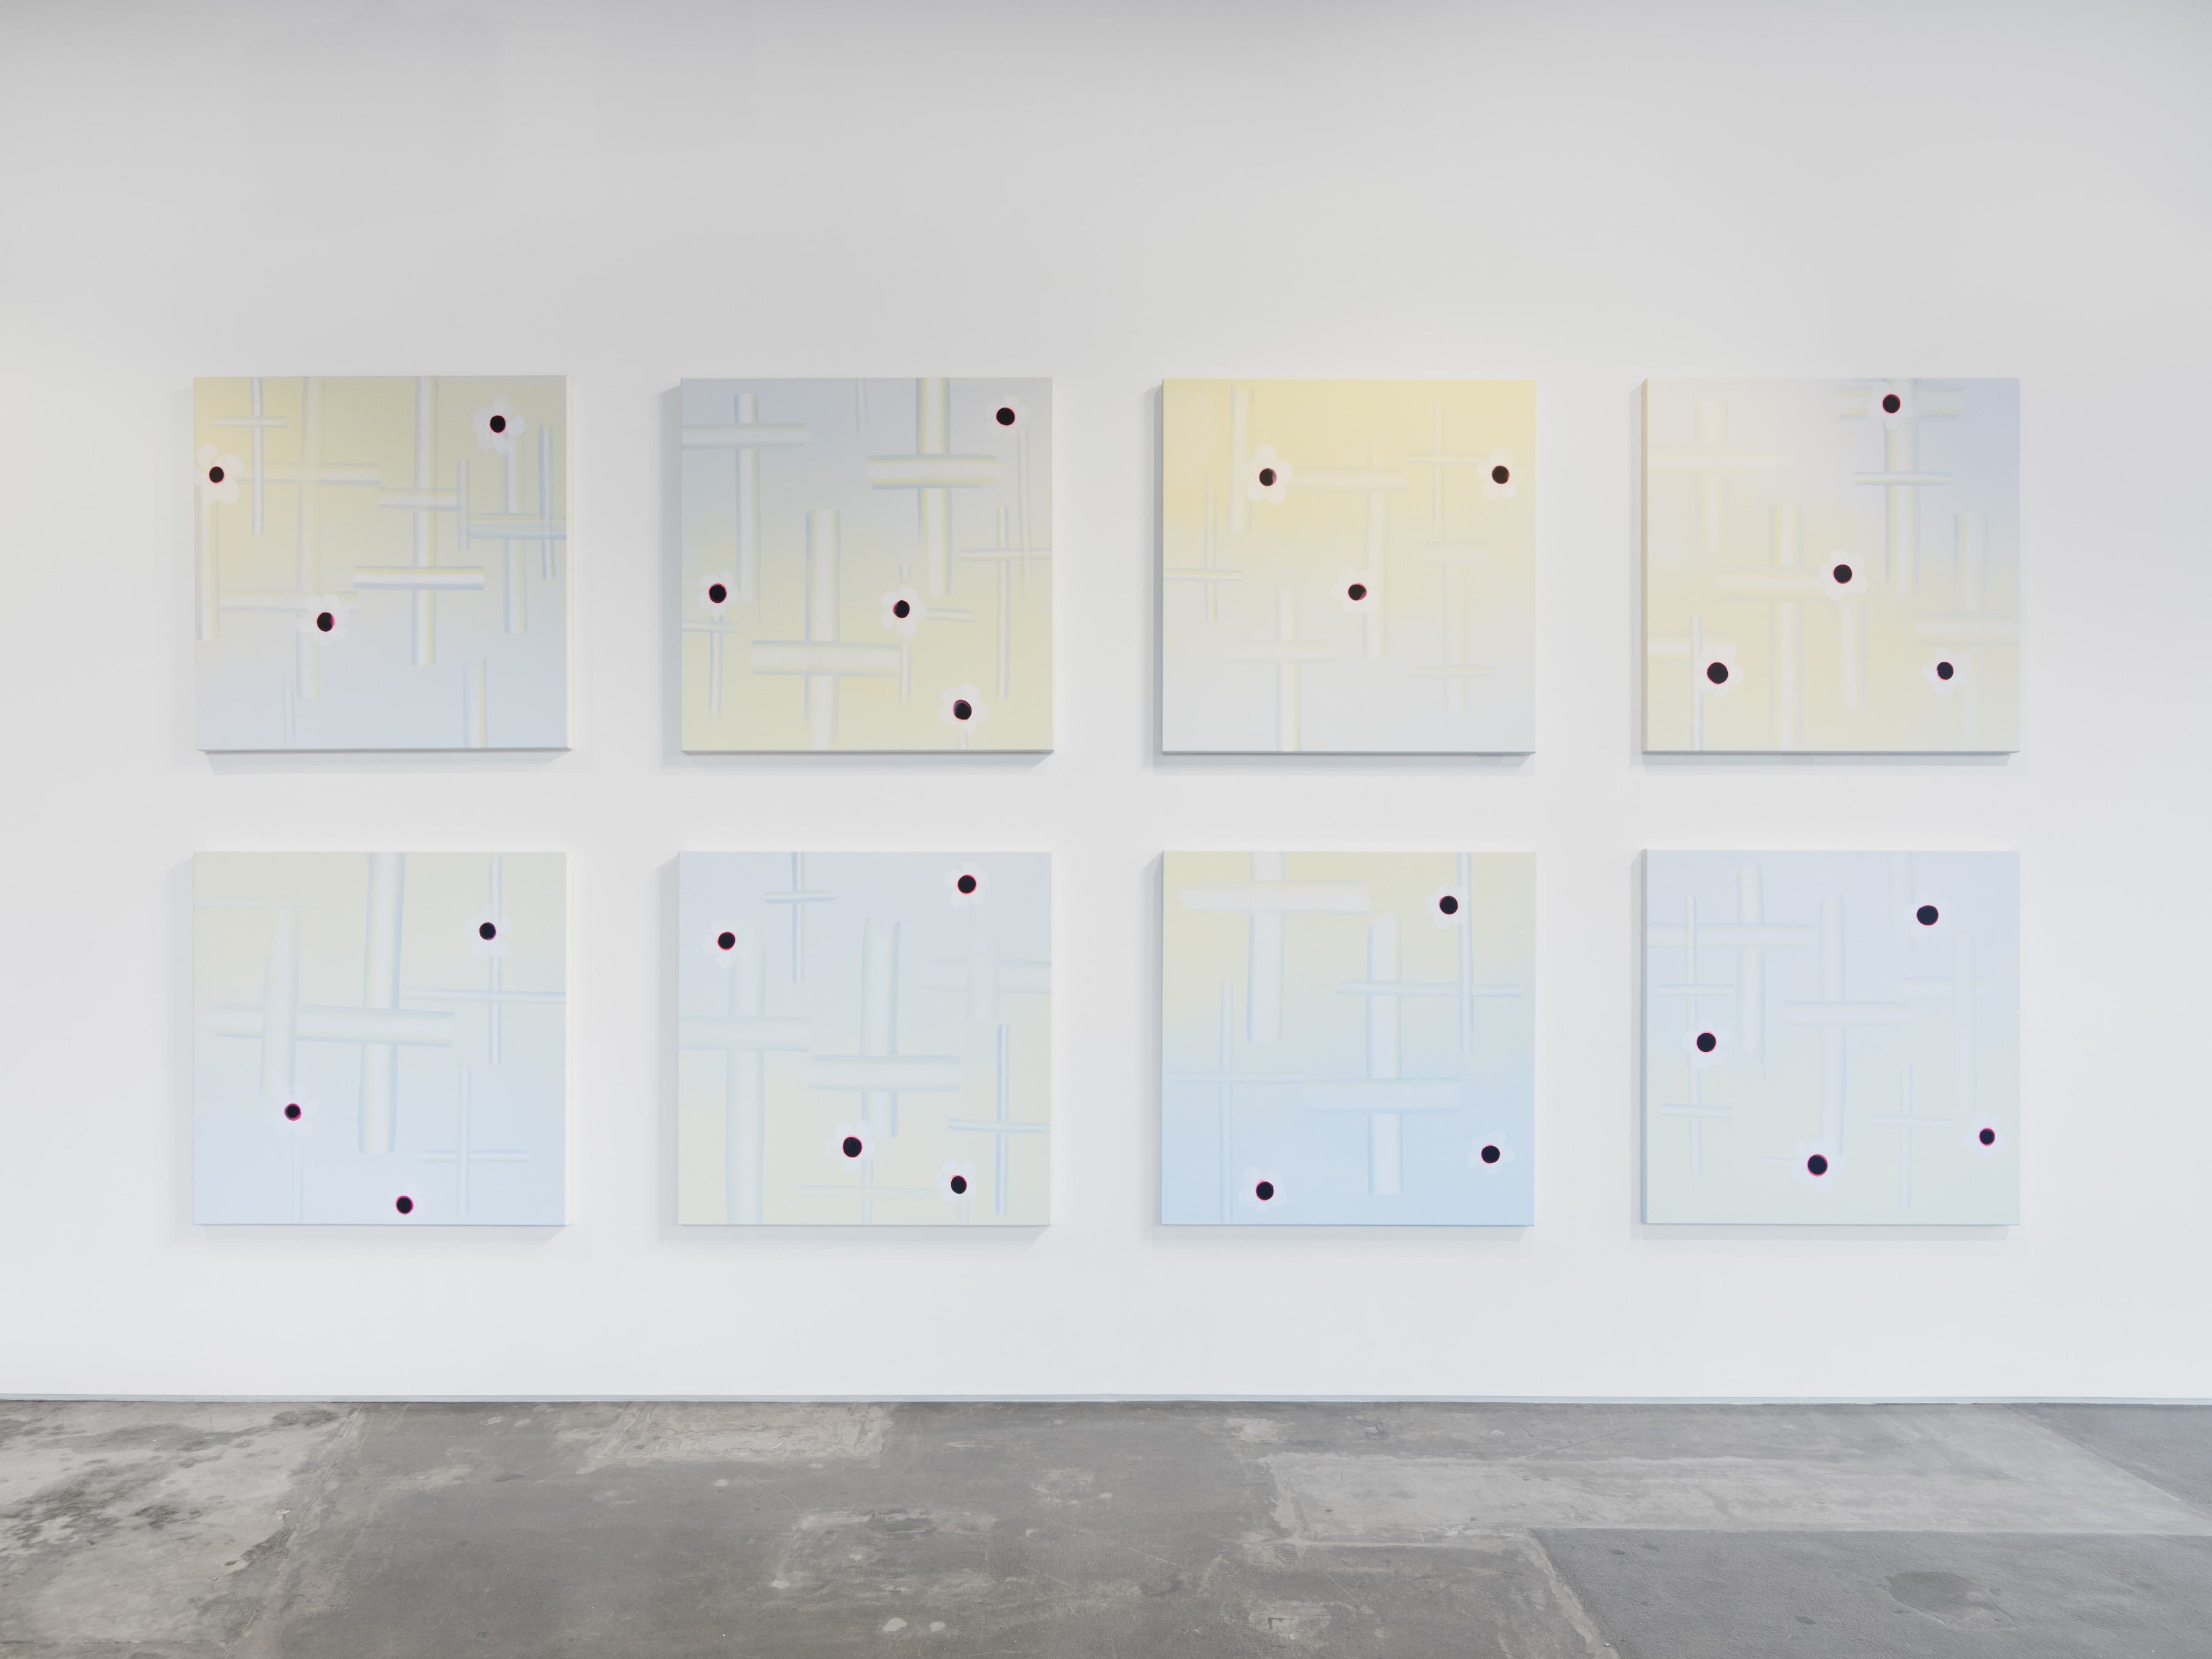 Installation view of Wanda Koop’s “Objects of Interest, Bullet Proof” at Night Gallery. 8 square canvas’ are arranged in two rows, each with depictions of crosses and flowers 